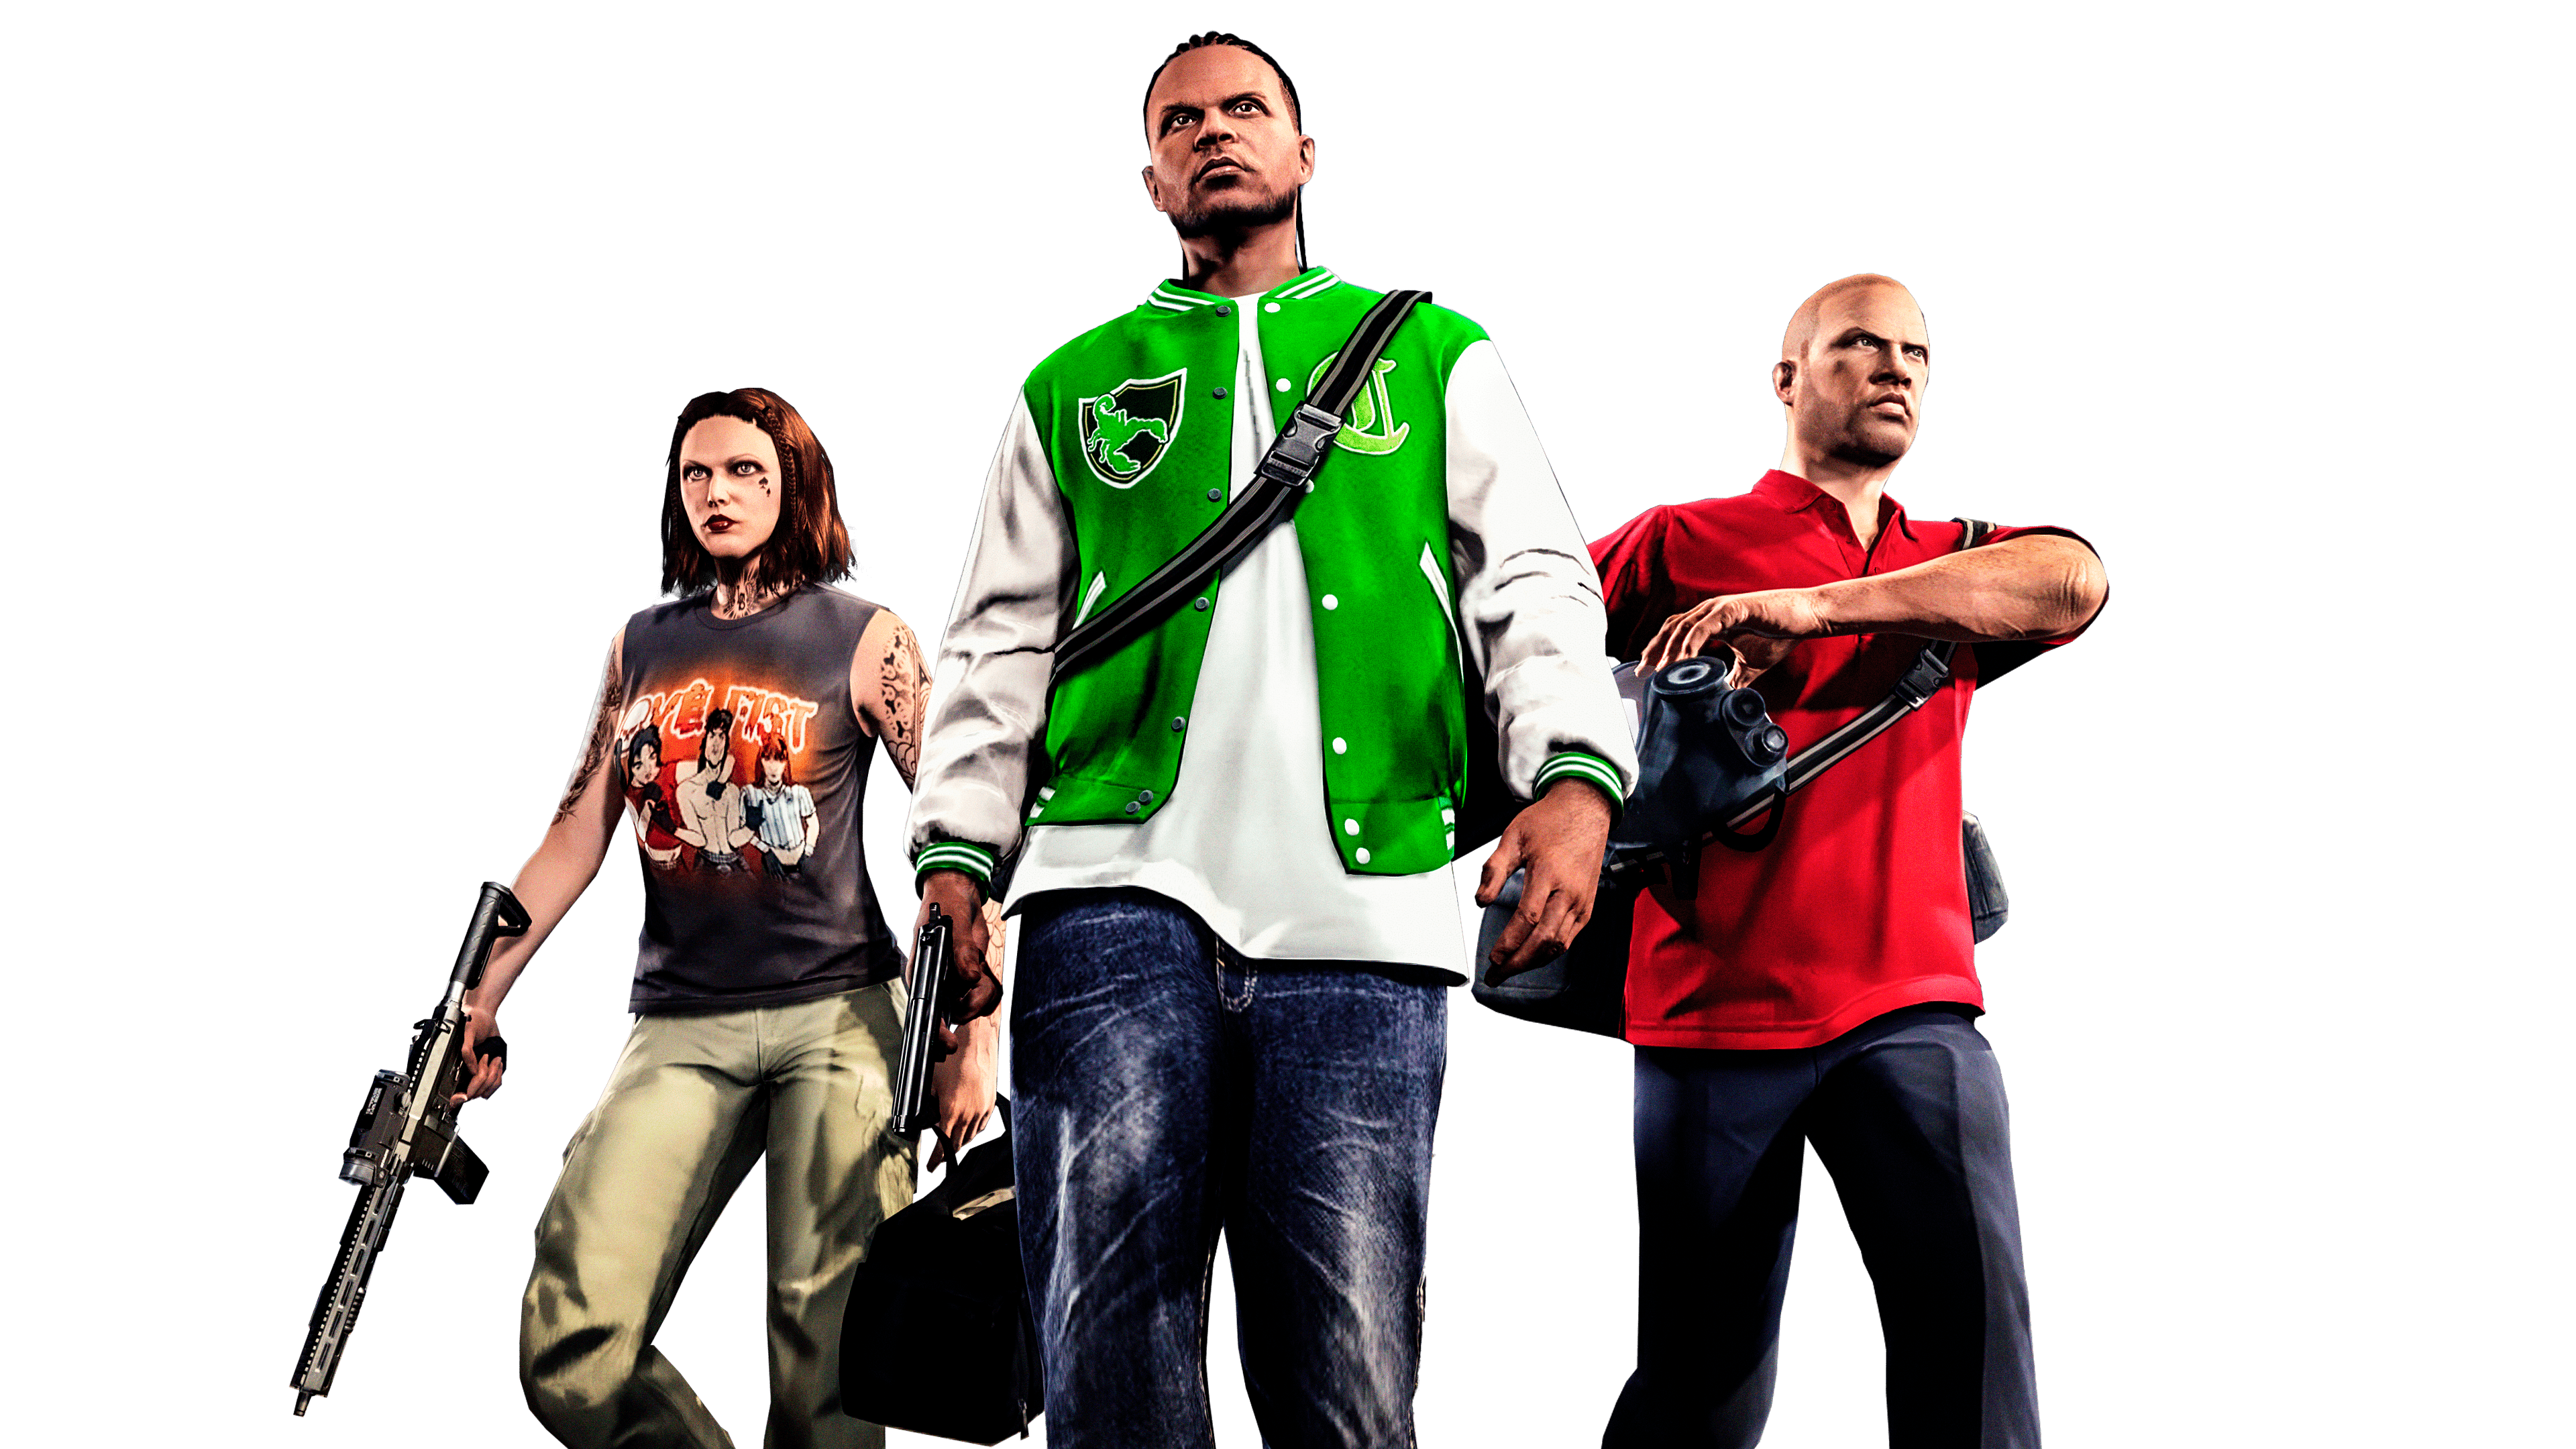 11 Games like GTA 5 to Play in 2023